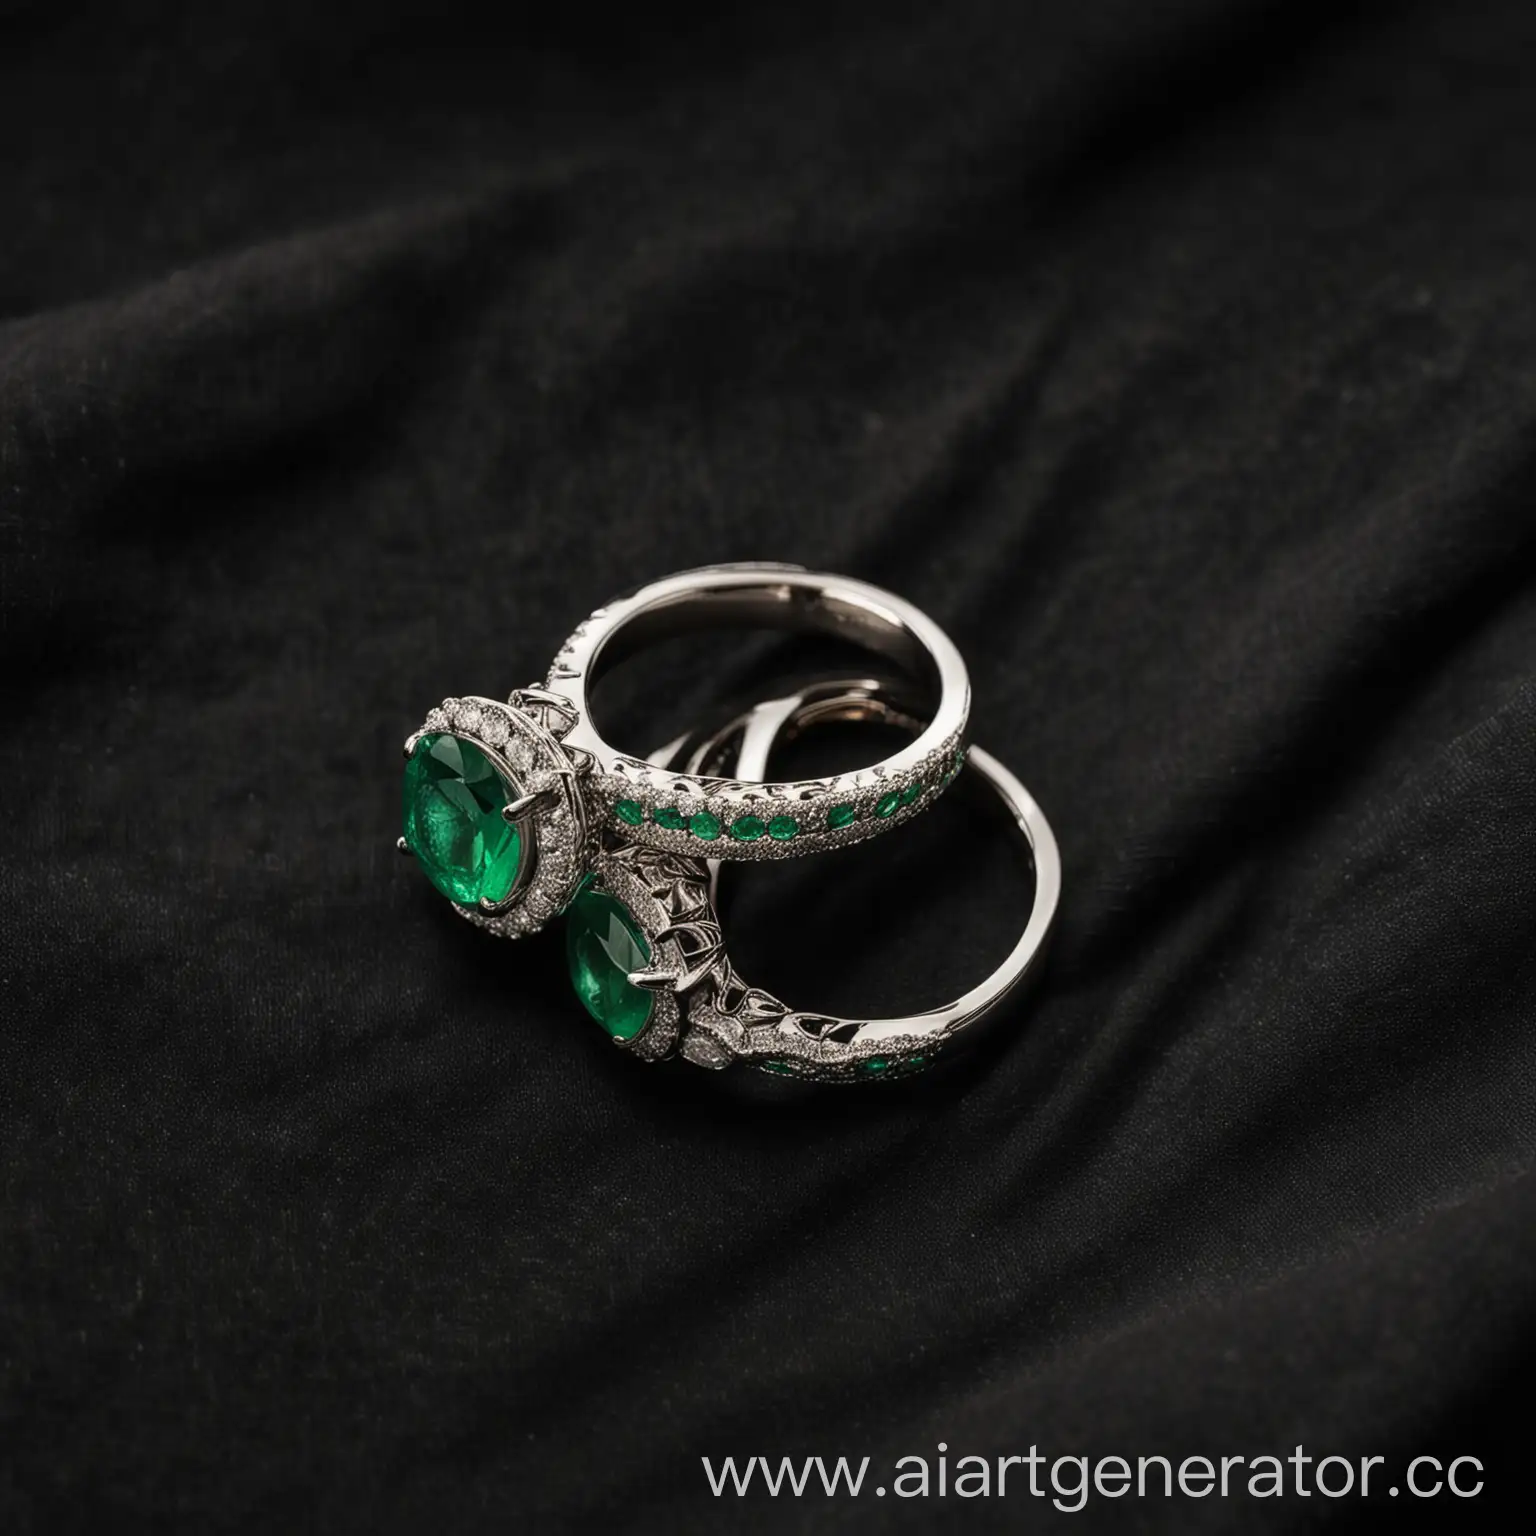 Emerald-Engagement-Rings-on-Black-Fabric